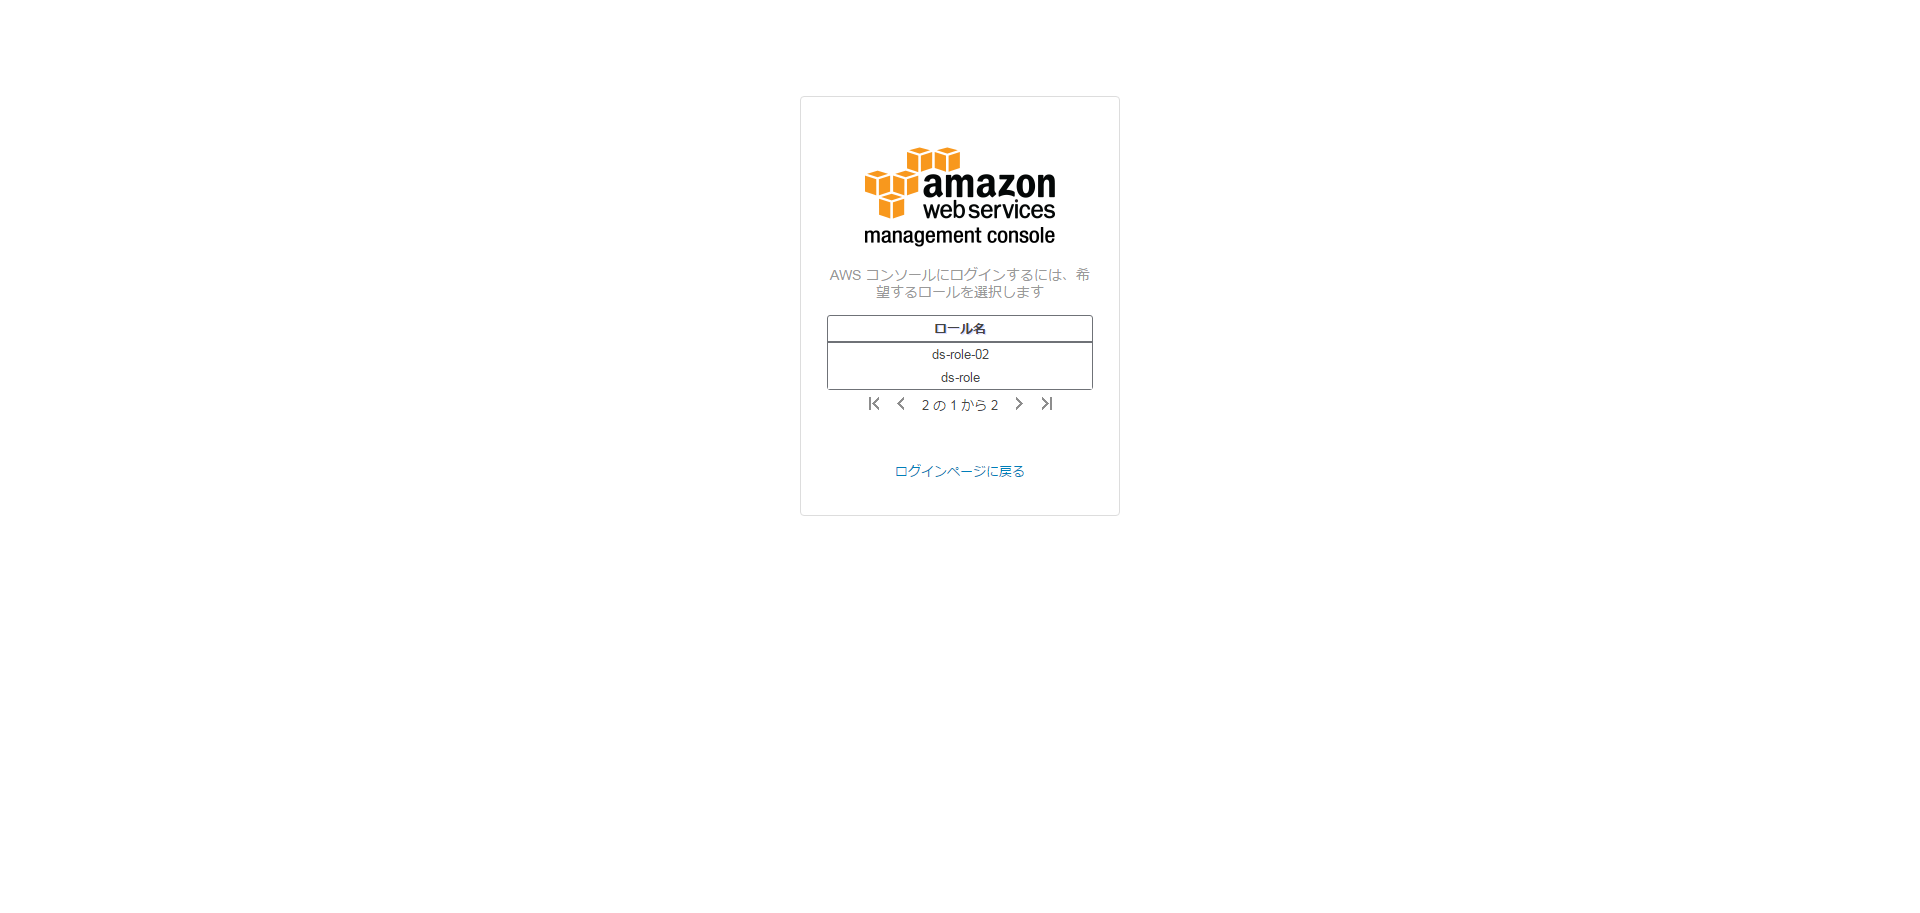 jawsug-20151109 - AWS Apps Authentication (1).png